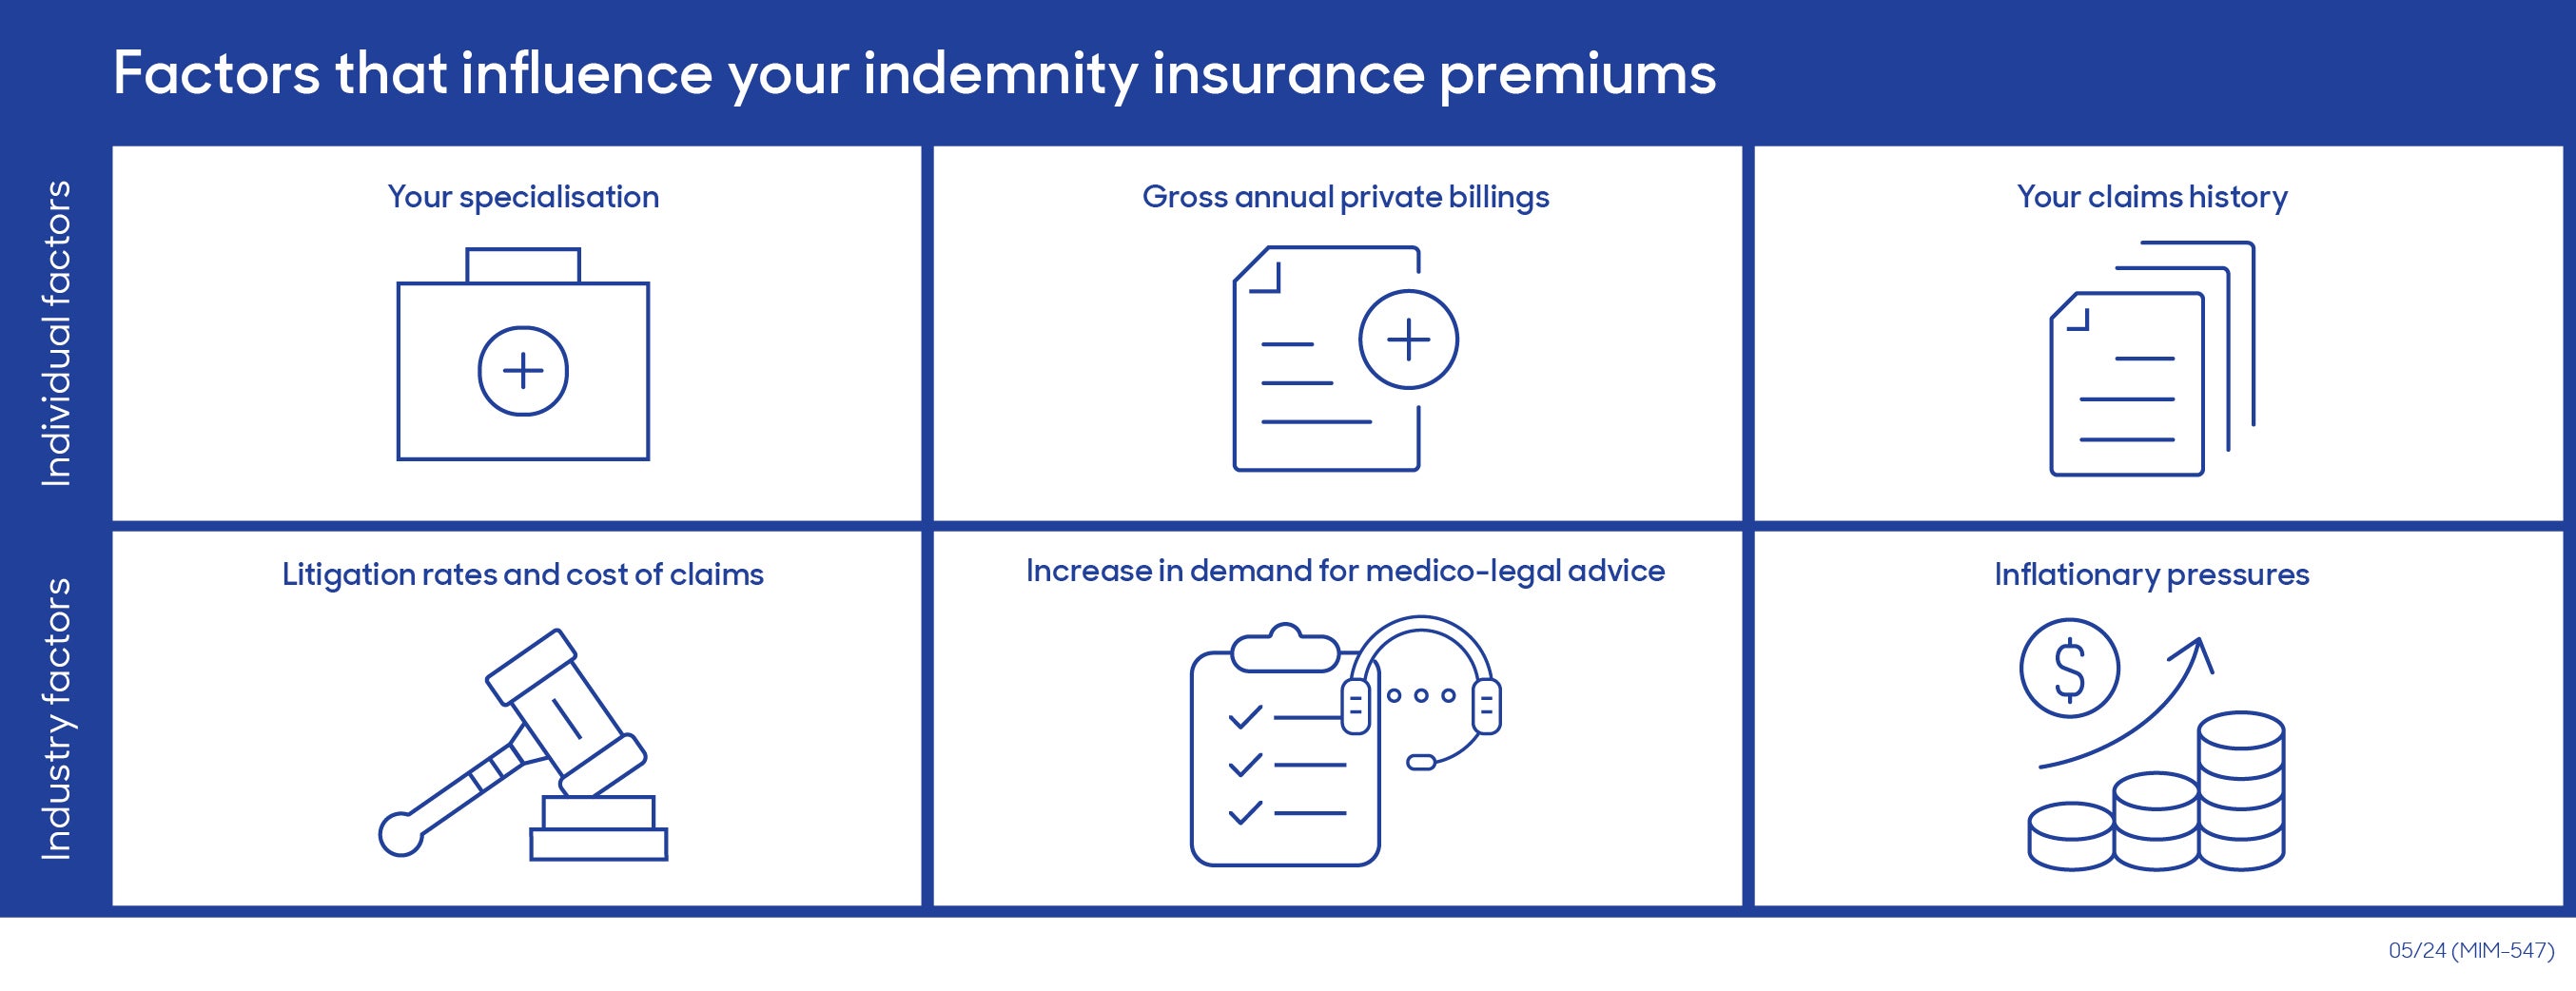 Infographic of factors that increase your medical indemnity premium: Specialisation, gross annual private billings, your claim history, industry litigation rates and cost of claims, increase in demand for medical-legal advice, inflationary pressures.